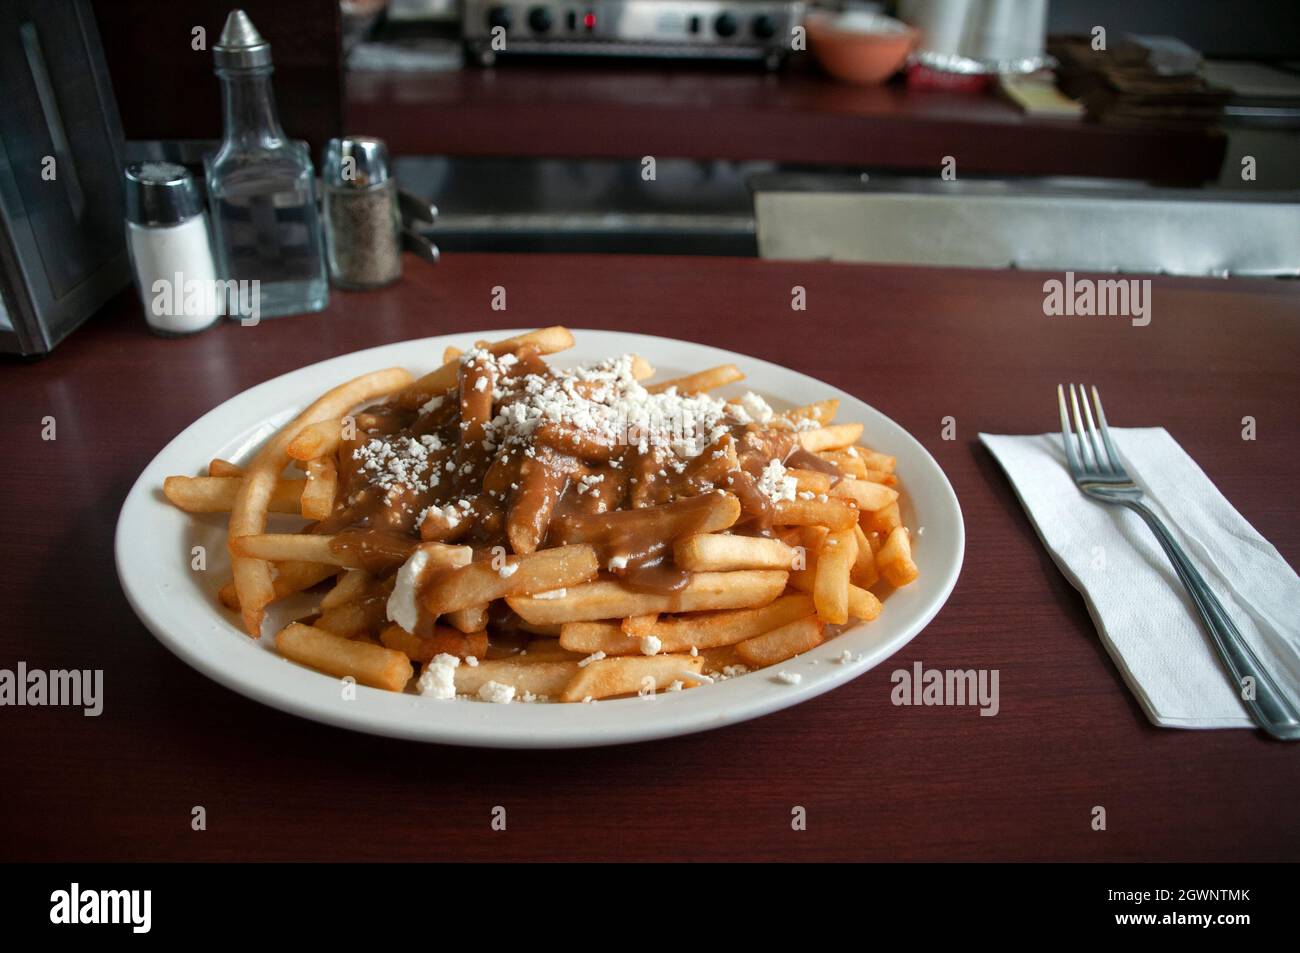 A plate of Greek poutine with feta cheese, a take on an iconic Canadian dish, served at a traditional diner in Toronto, Canada. Stock Photo